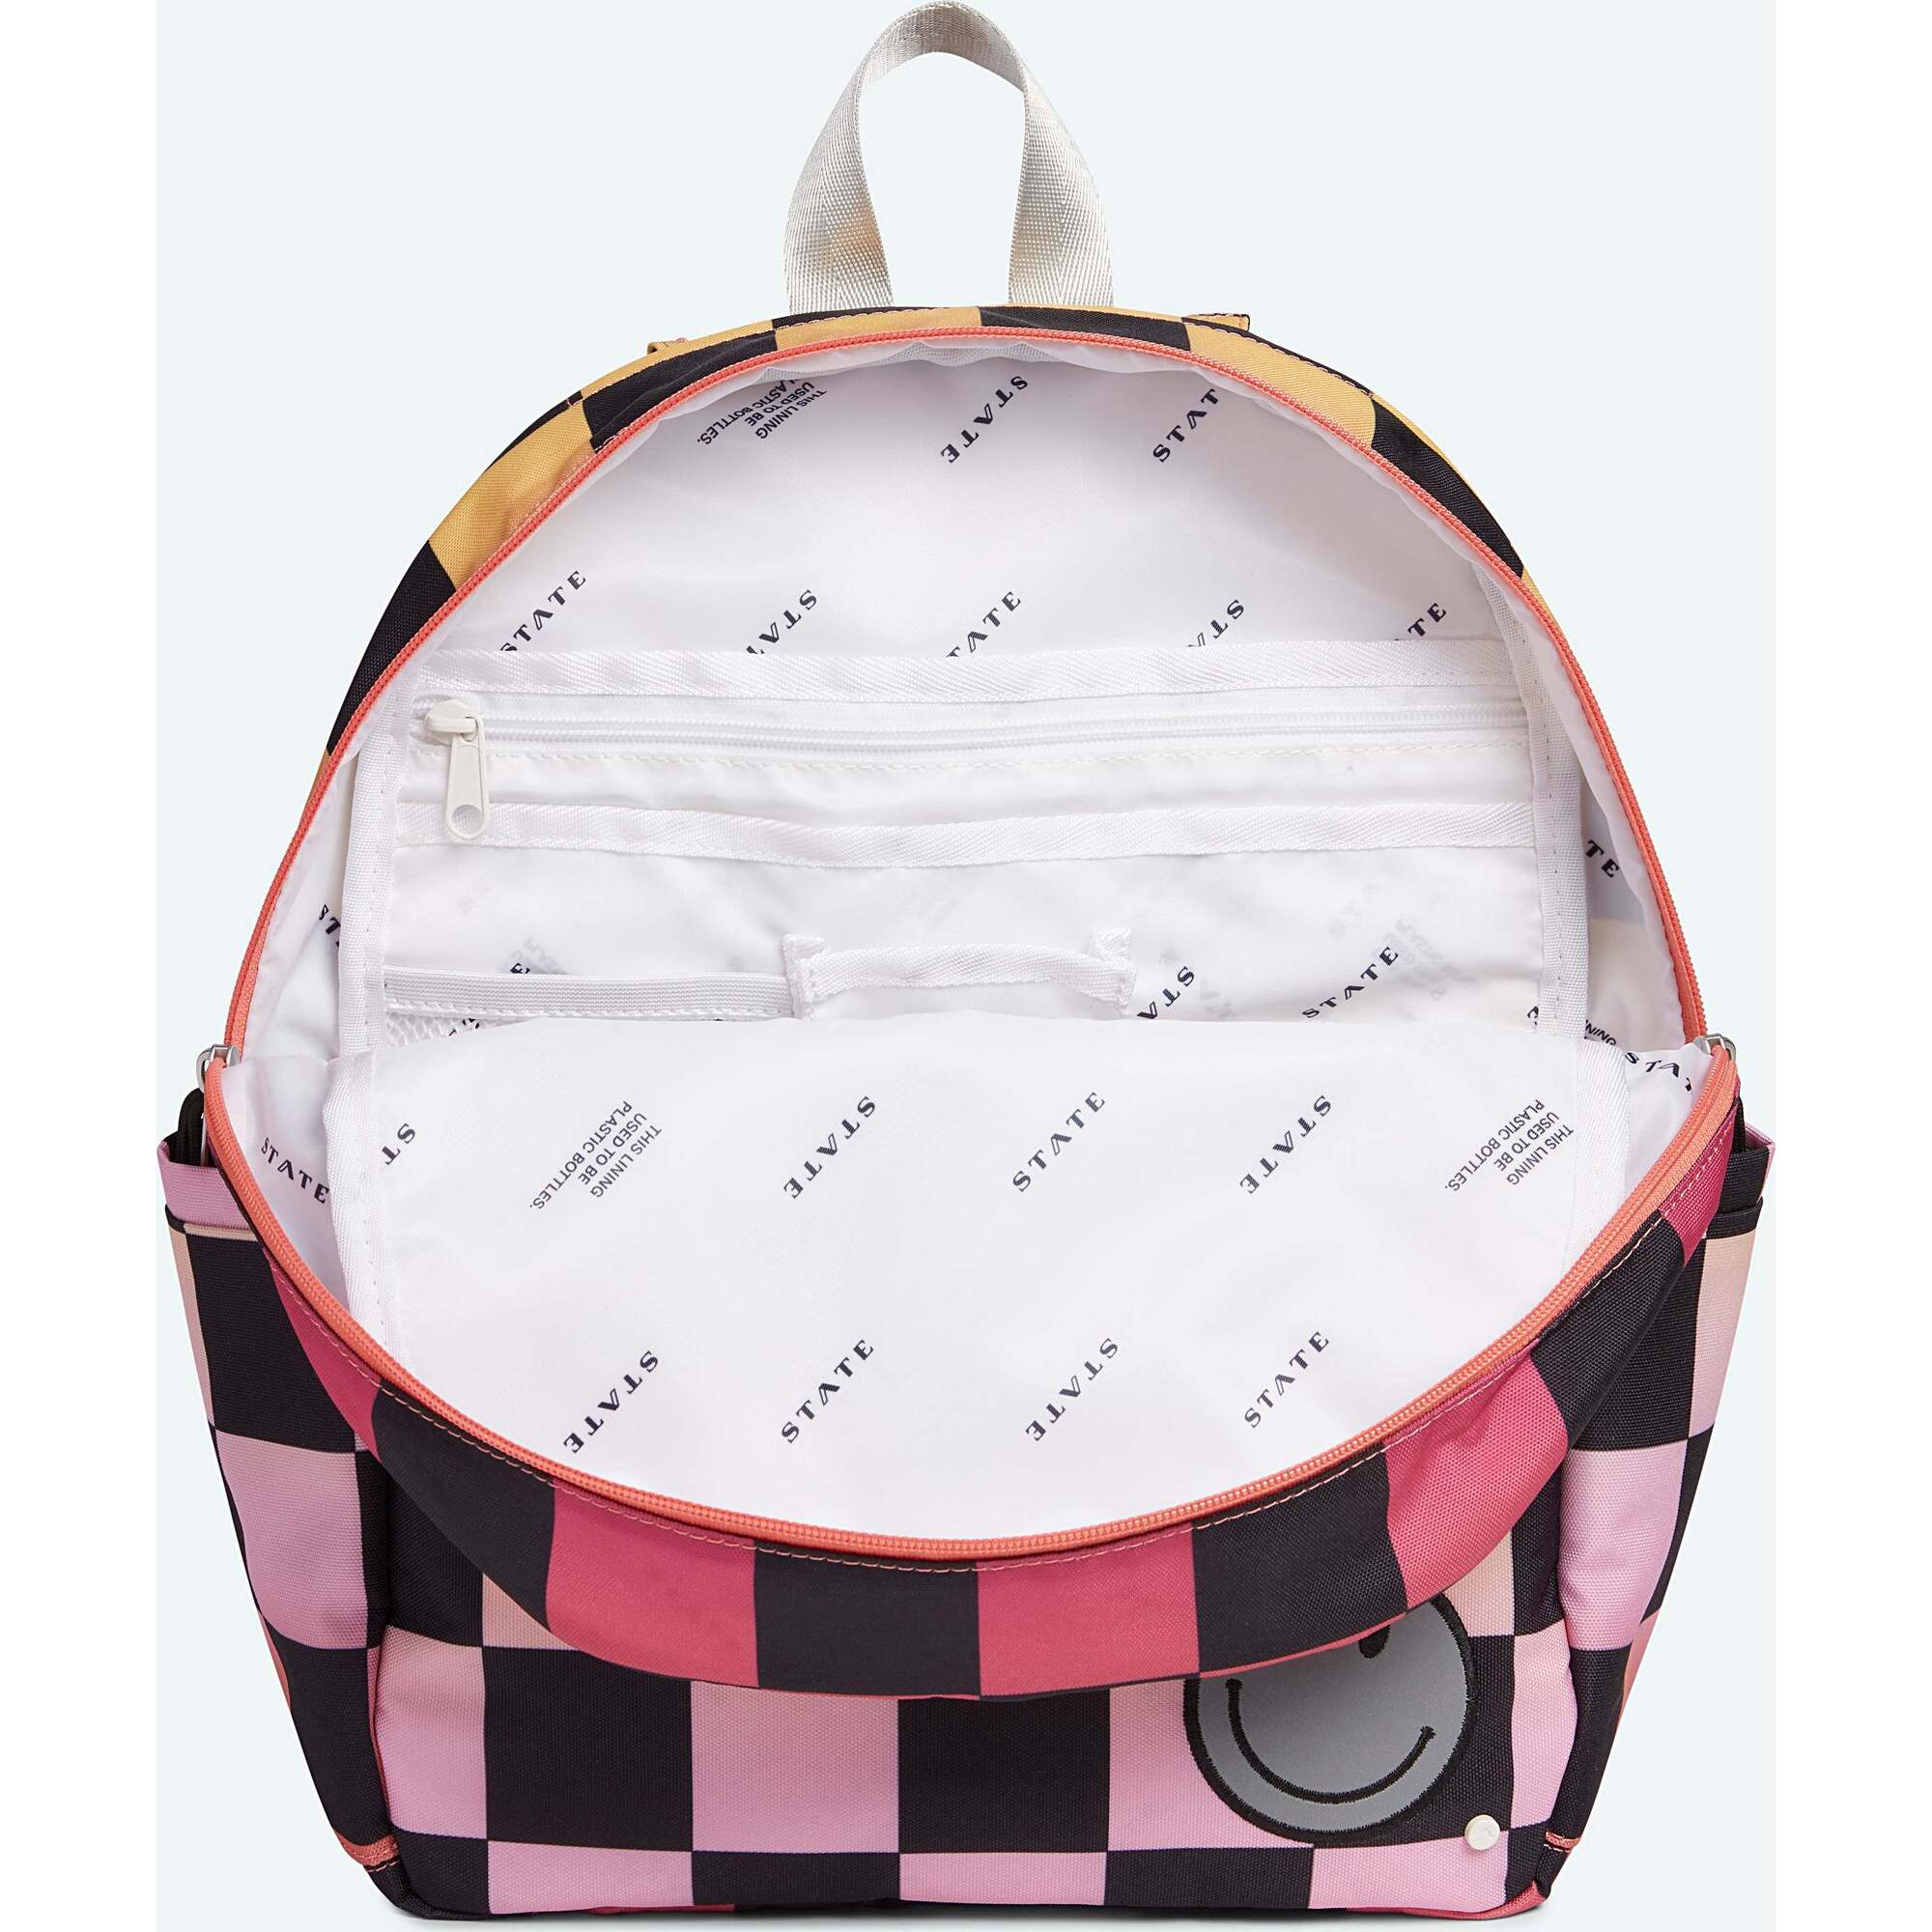 Girls Pink Checkered Backpack